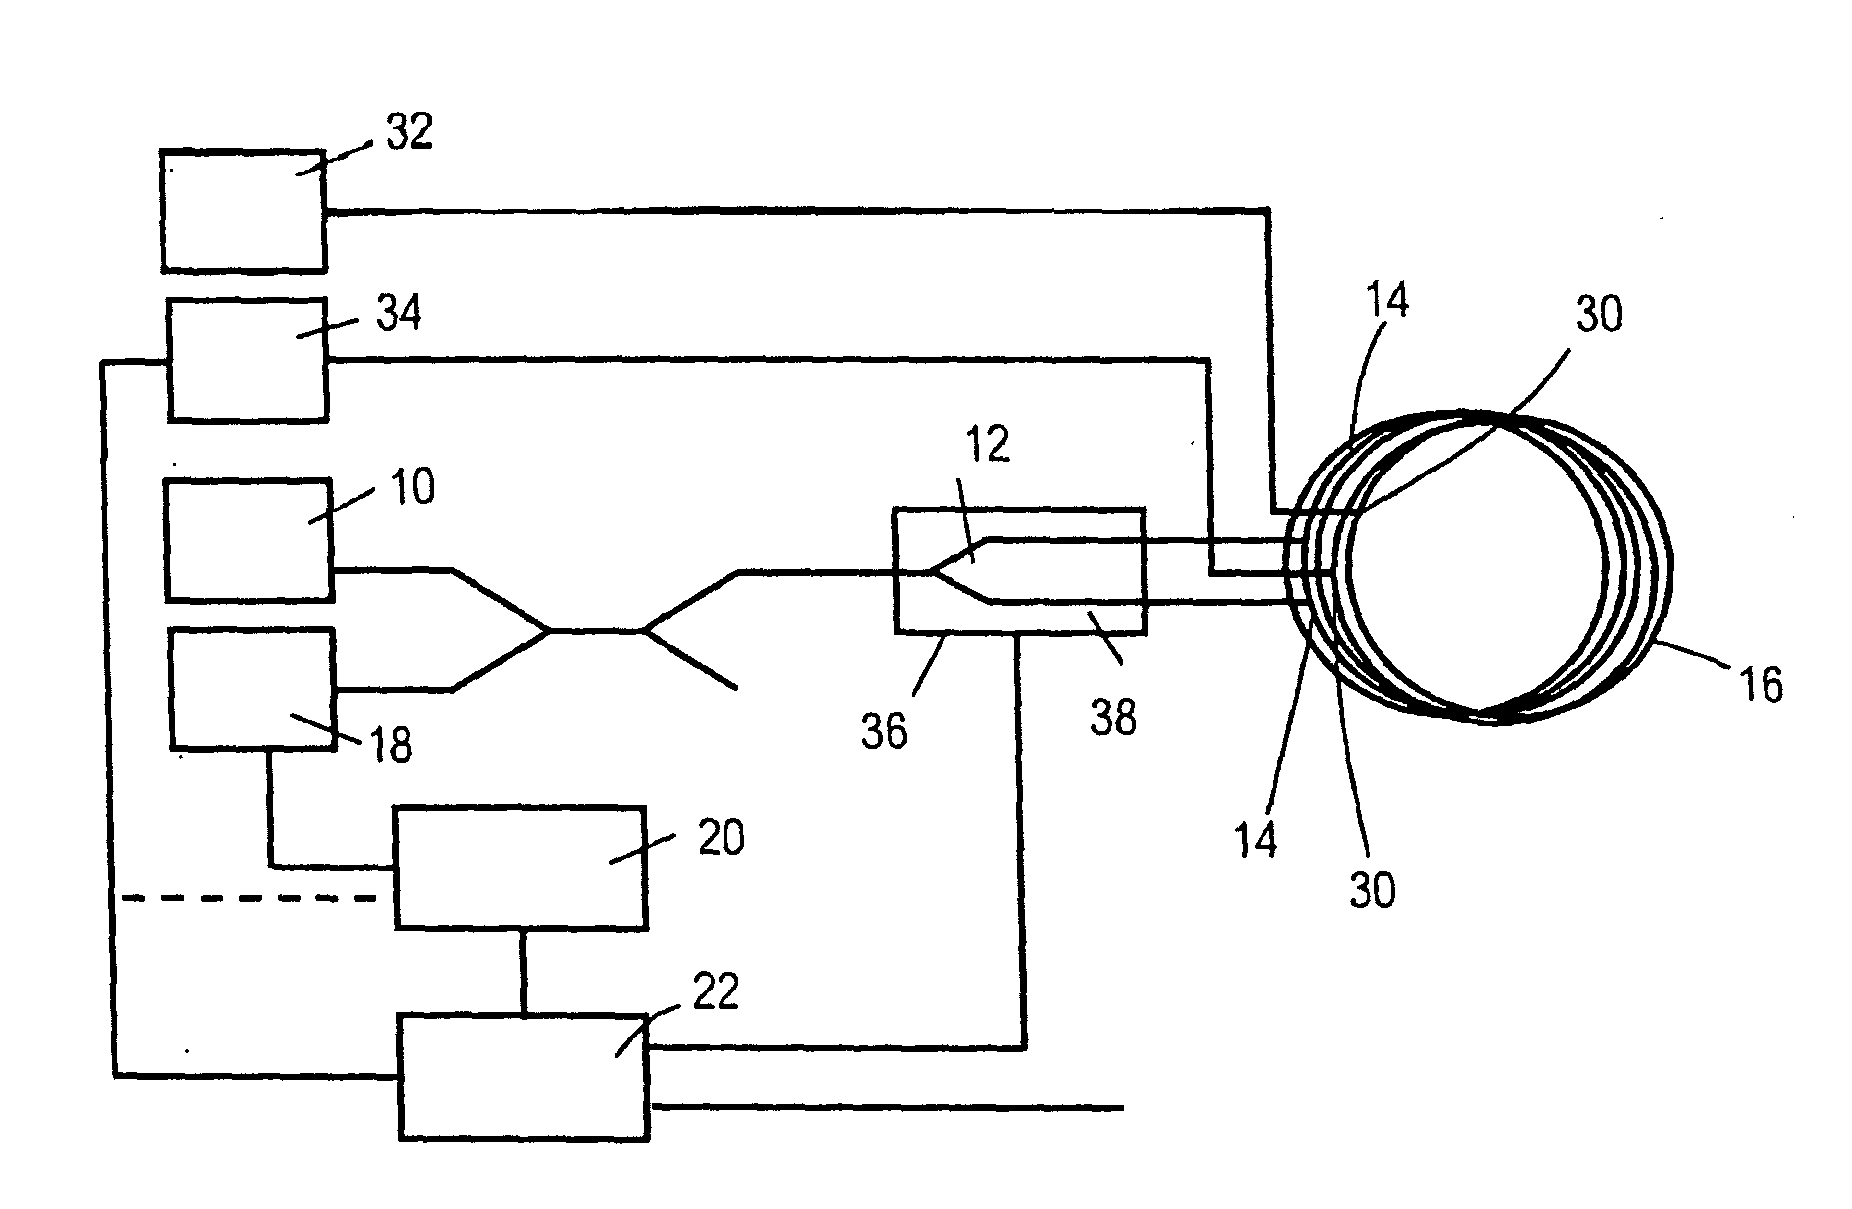 Fiber optic interferometer and method for determining physical state parameters in the interior of a fiber coil of a fiber optic interferometer